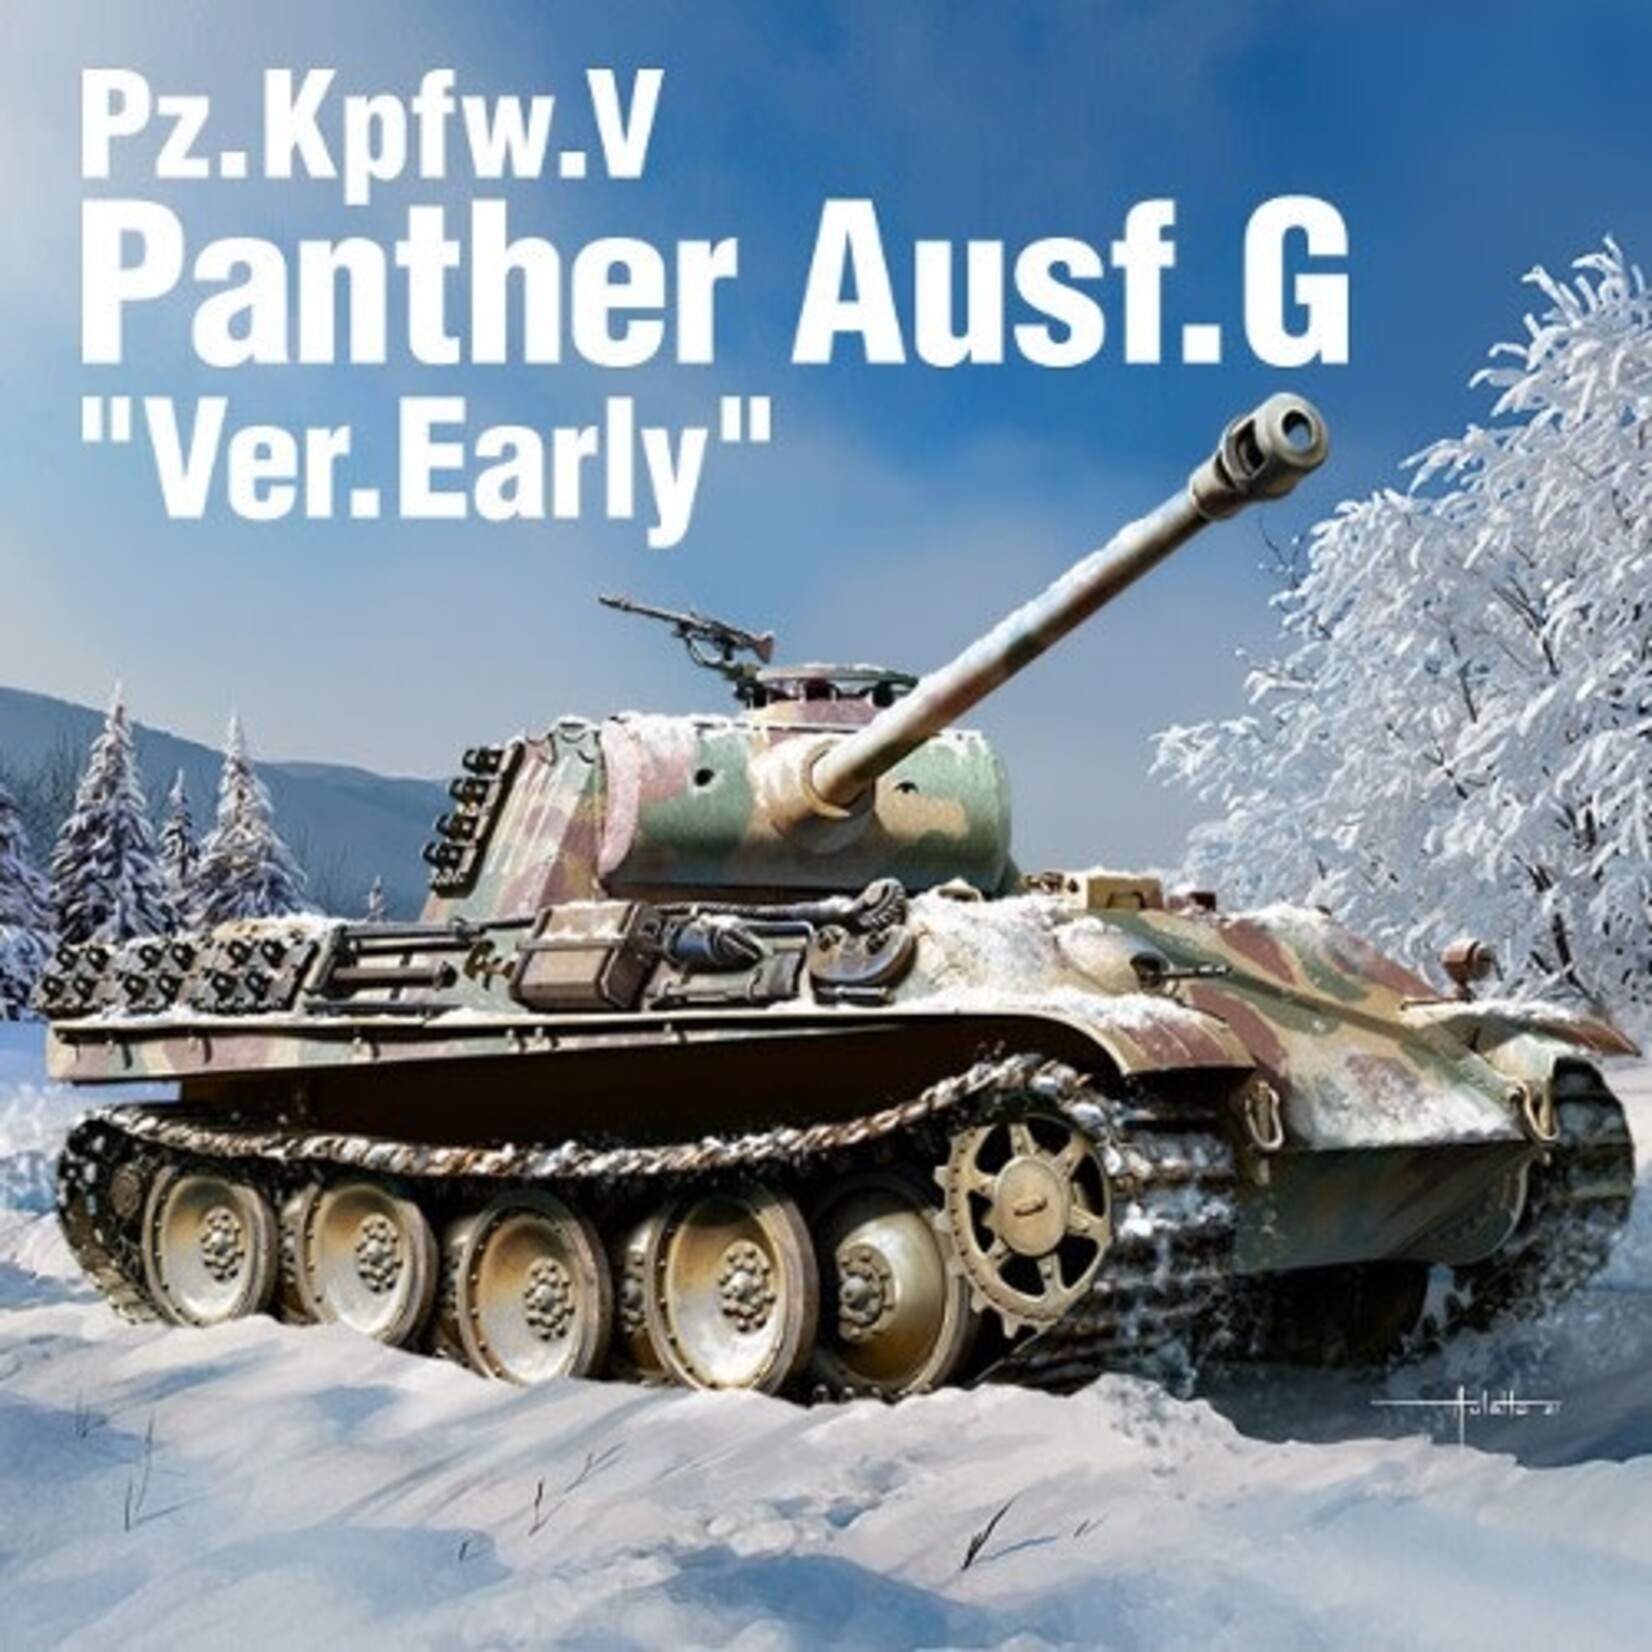 Academy 13529 1/35 Pz.Kpfw.V Panther Ausf.G "Ver.Early"